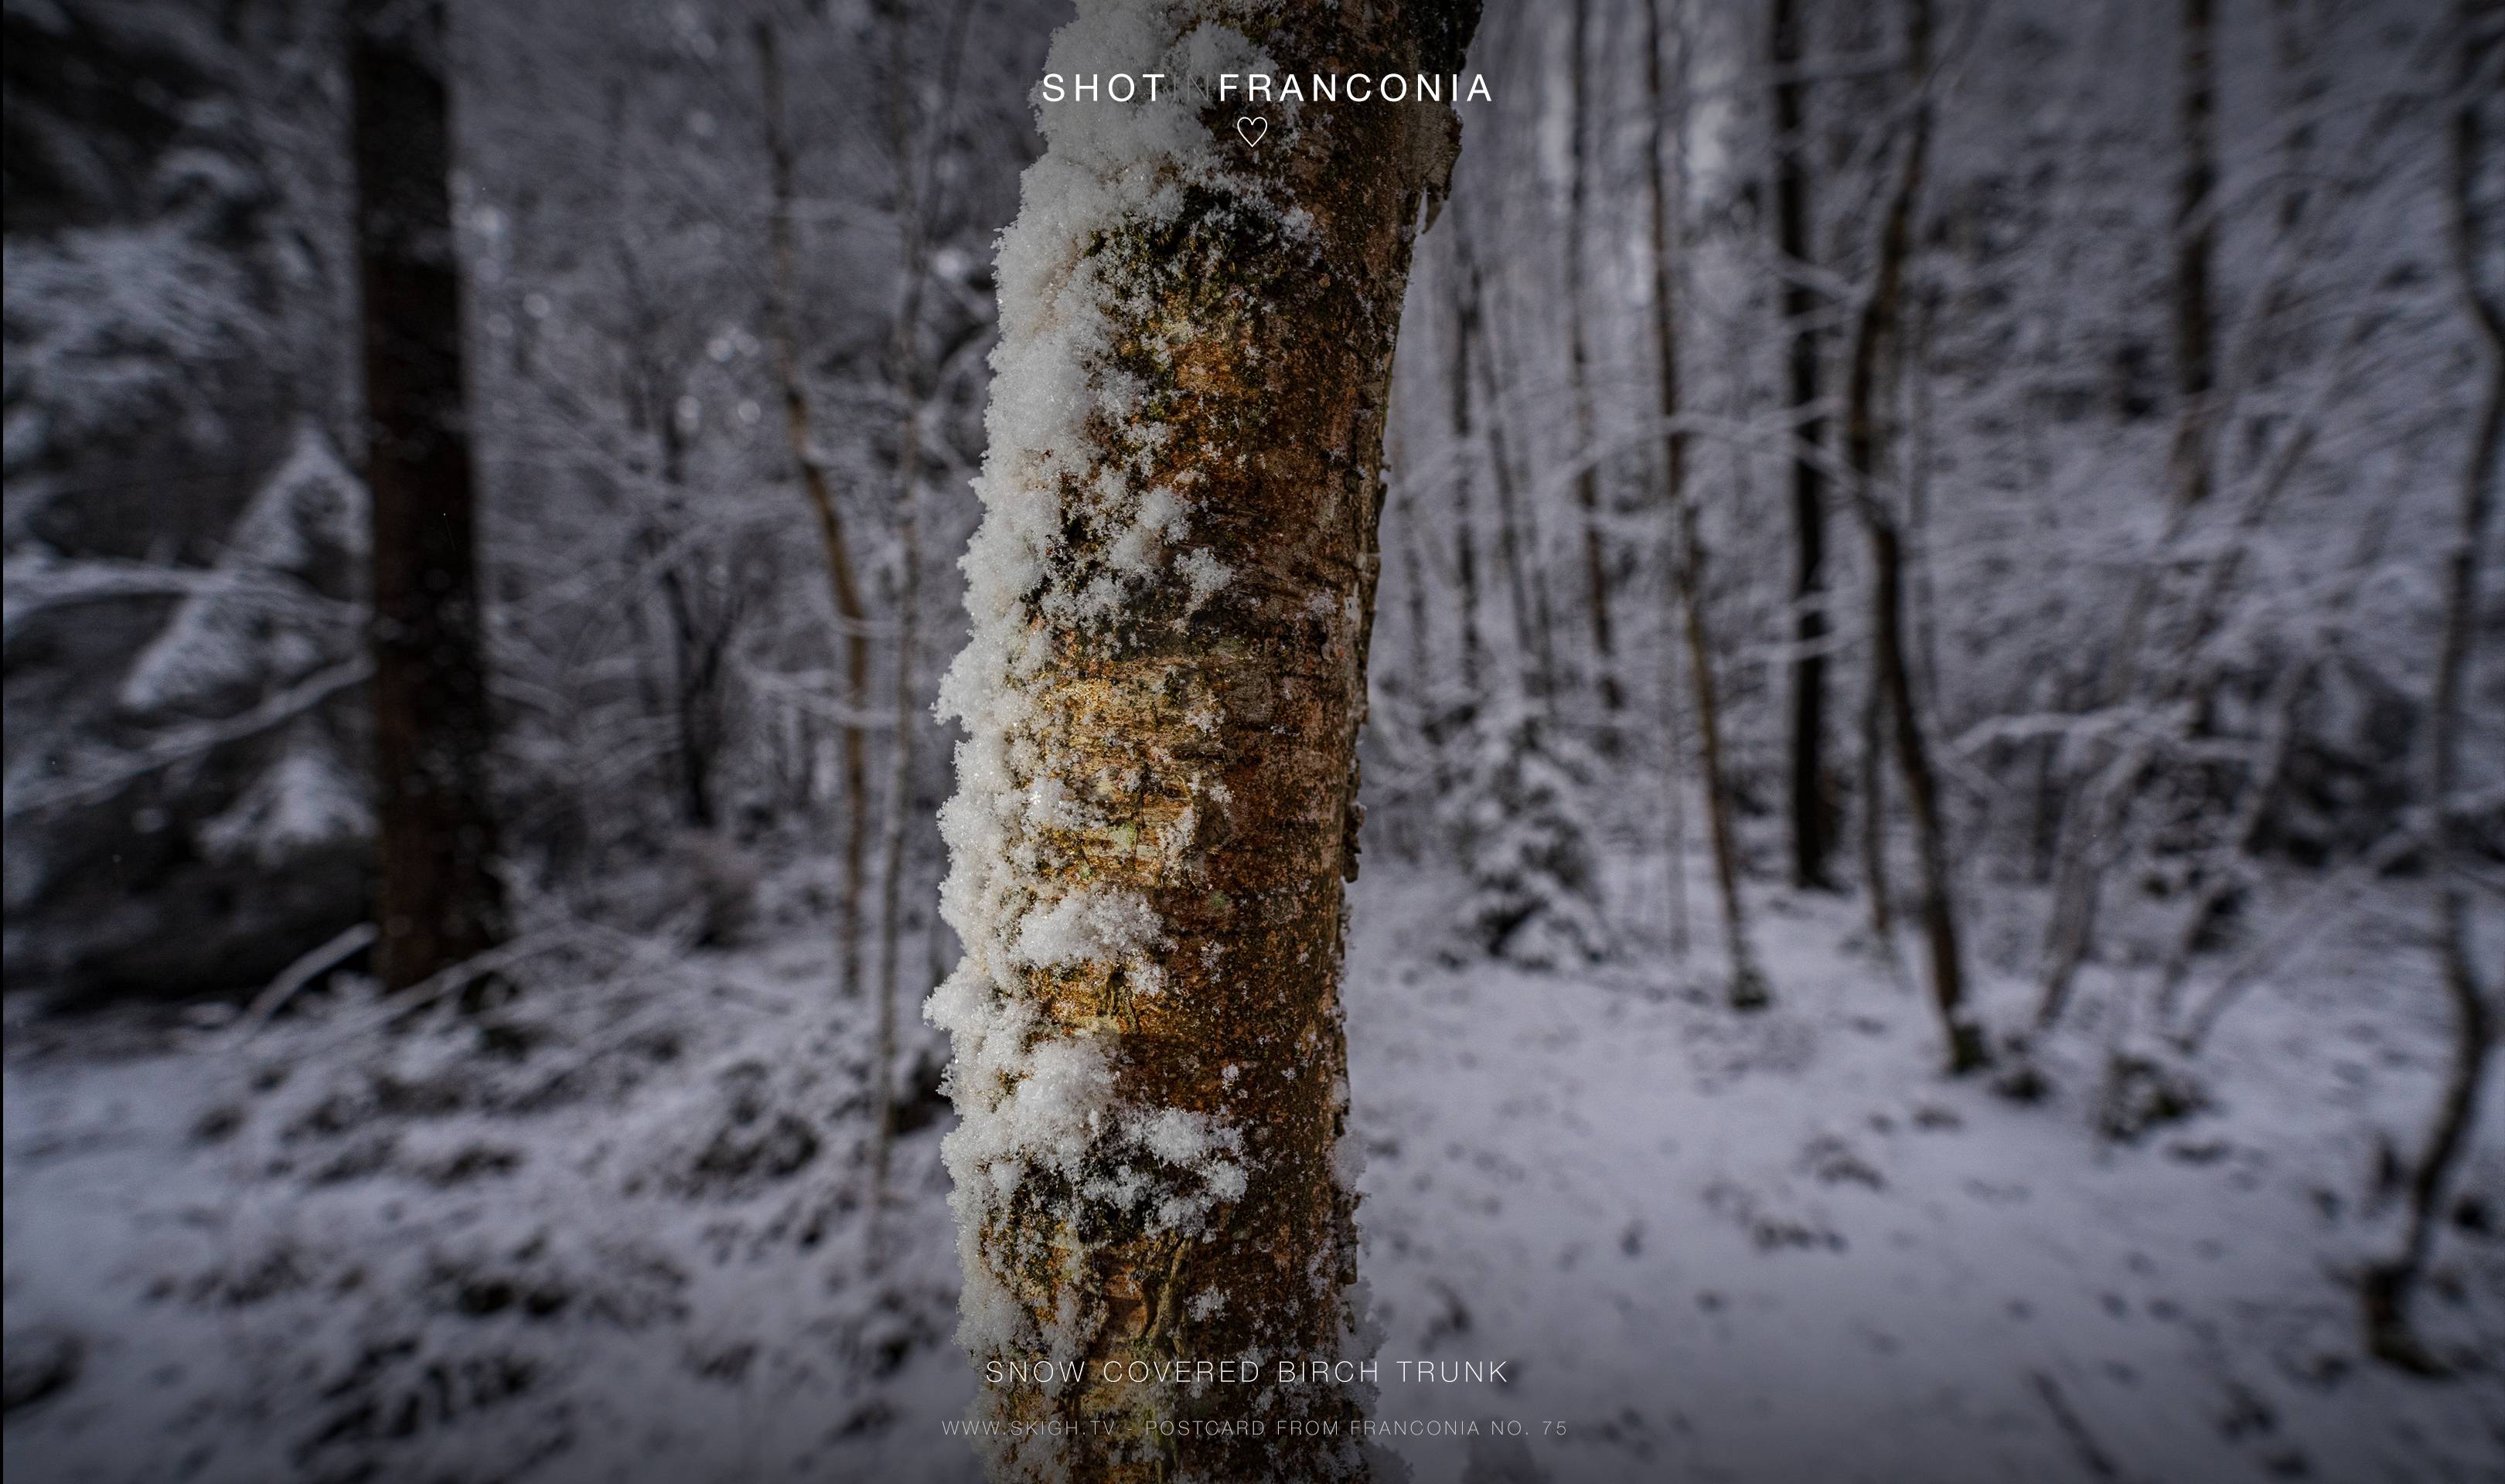 Snow covered birch trunk